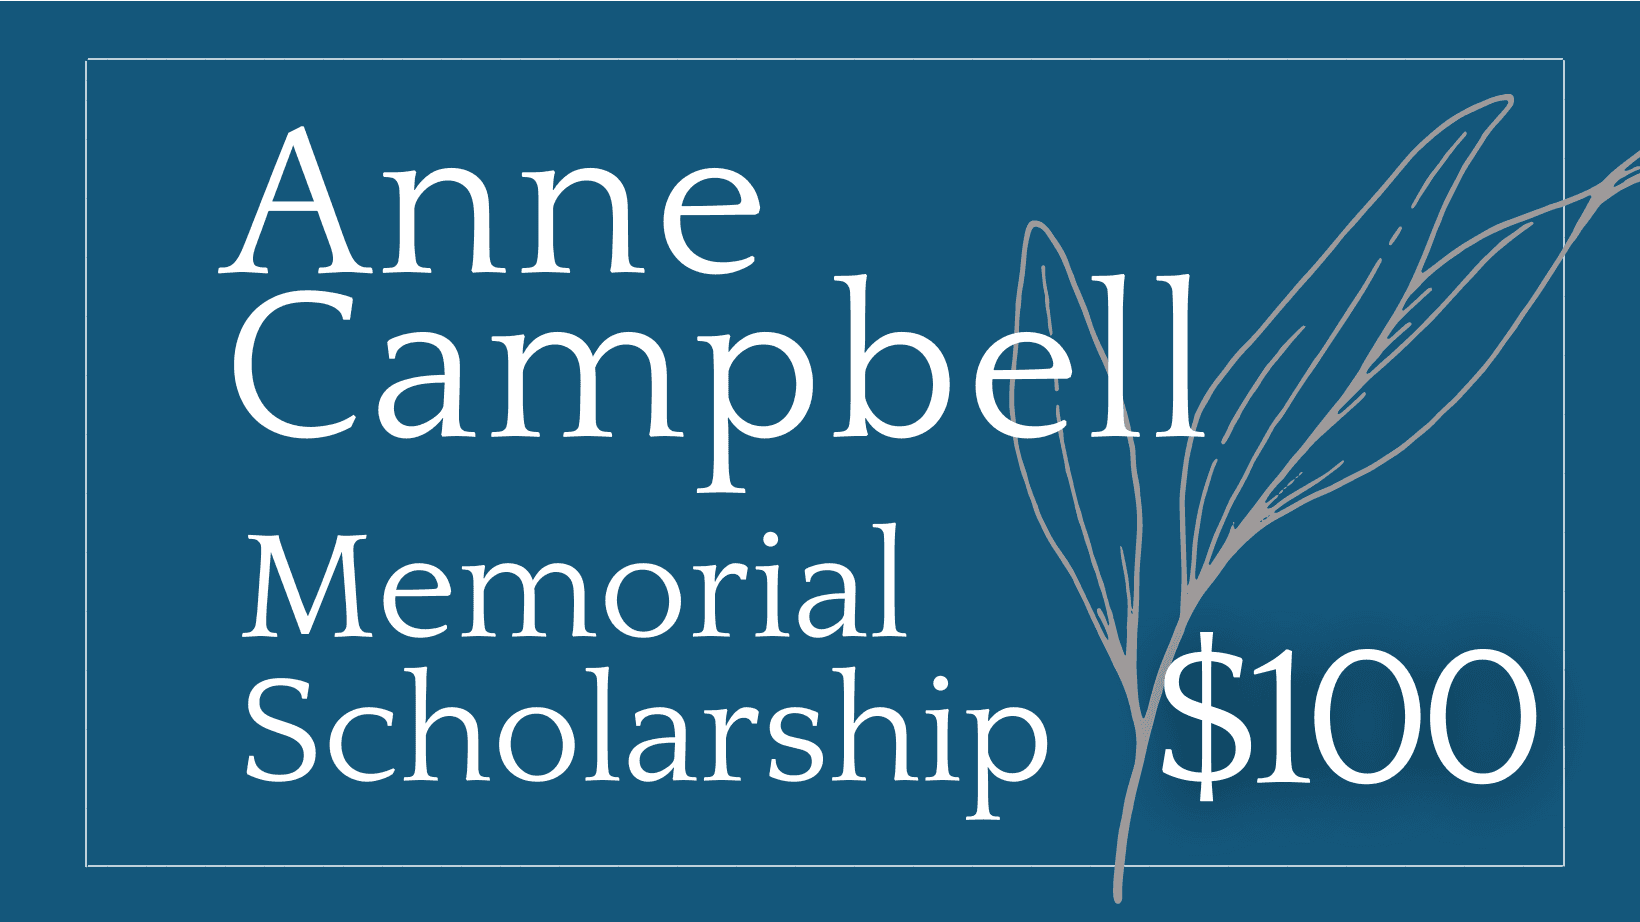 The Anne Campbell Memorial Scholarship supporting image.